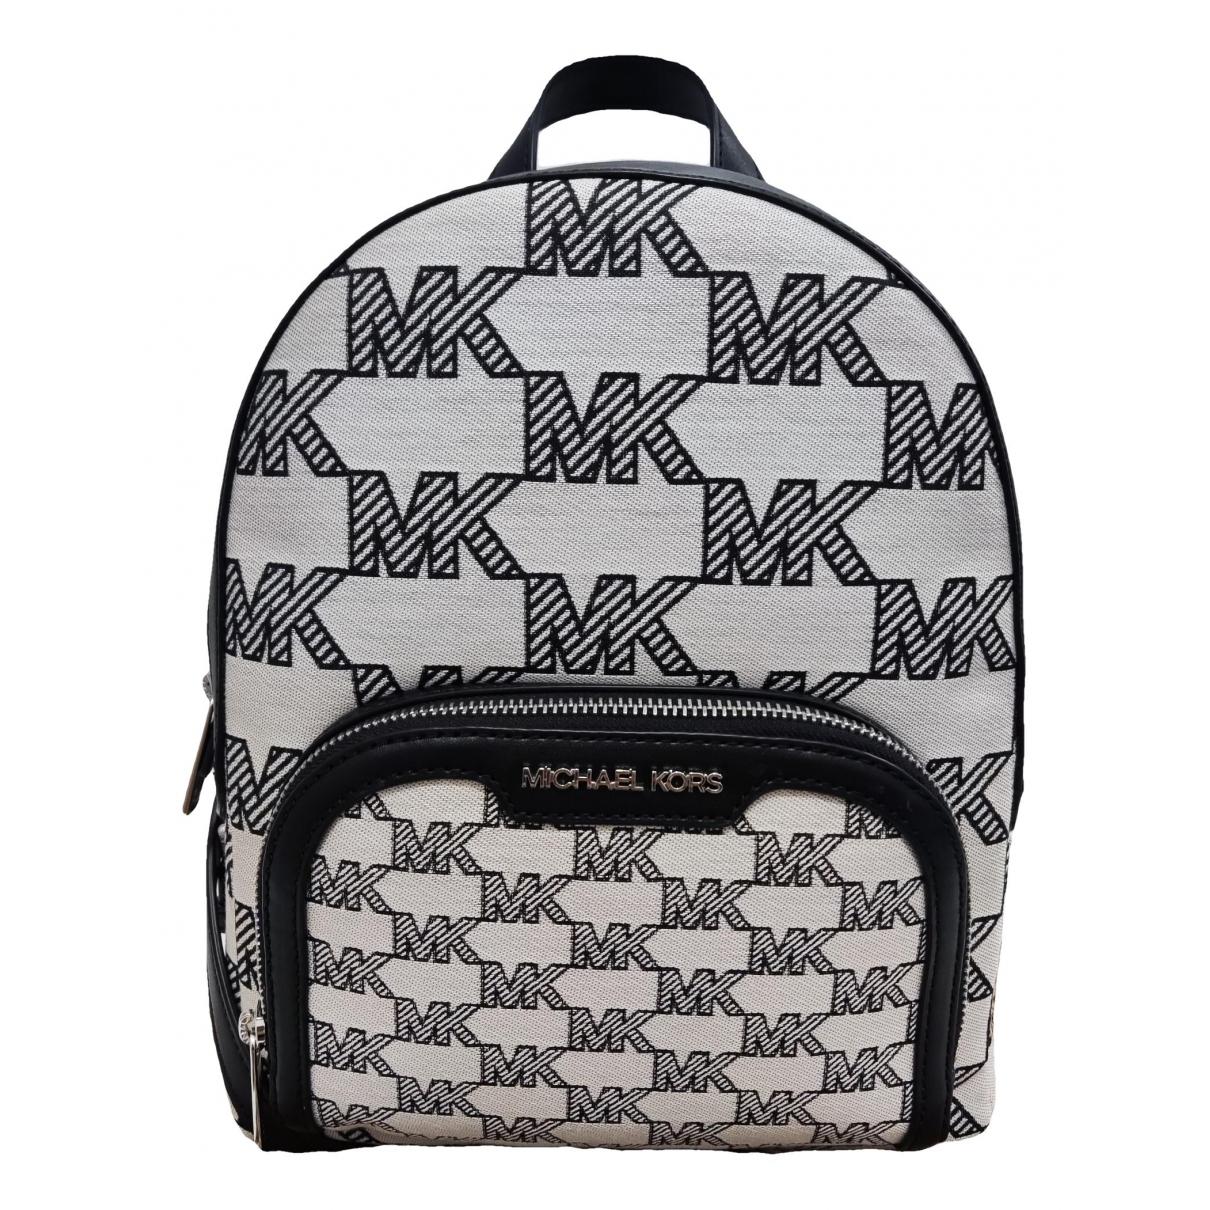 Backpack Michael Kors Multicolour in Not specified - 25102043